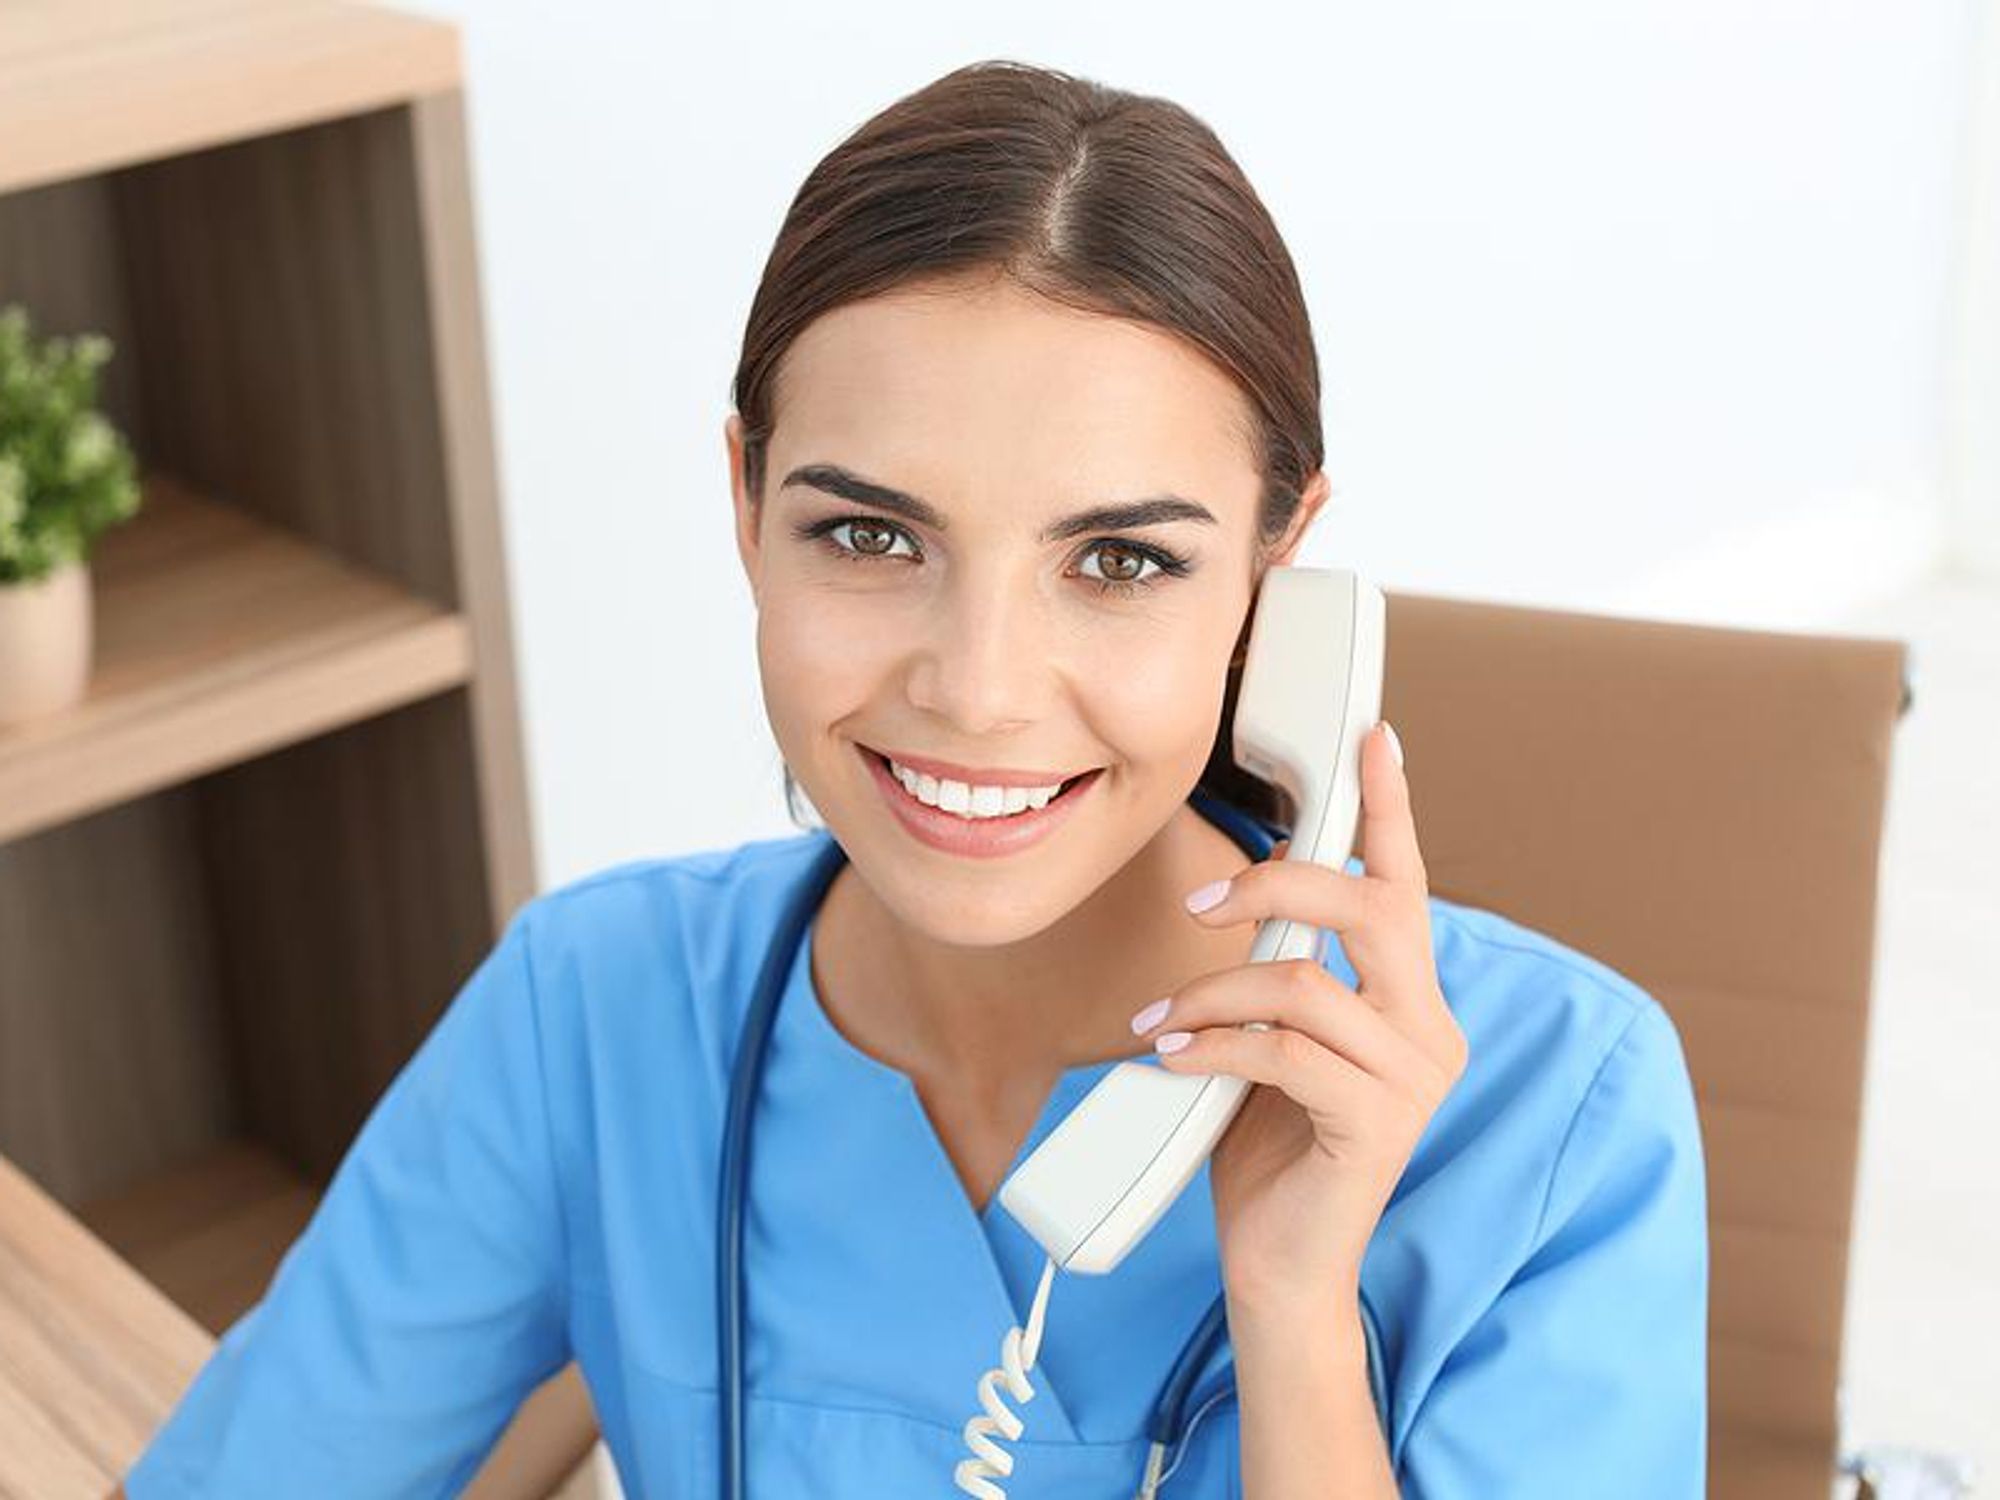 Medical assistant answers the phone